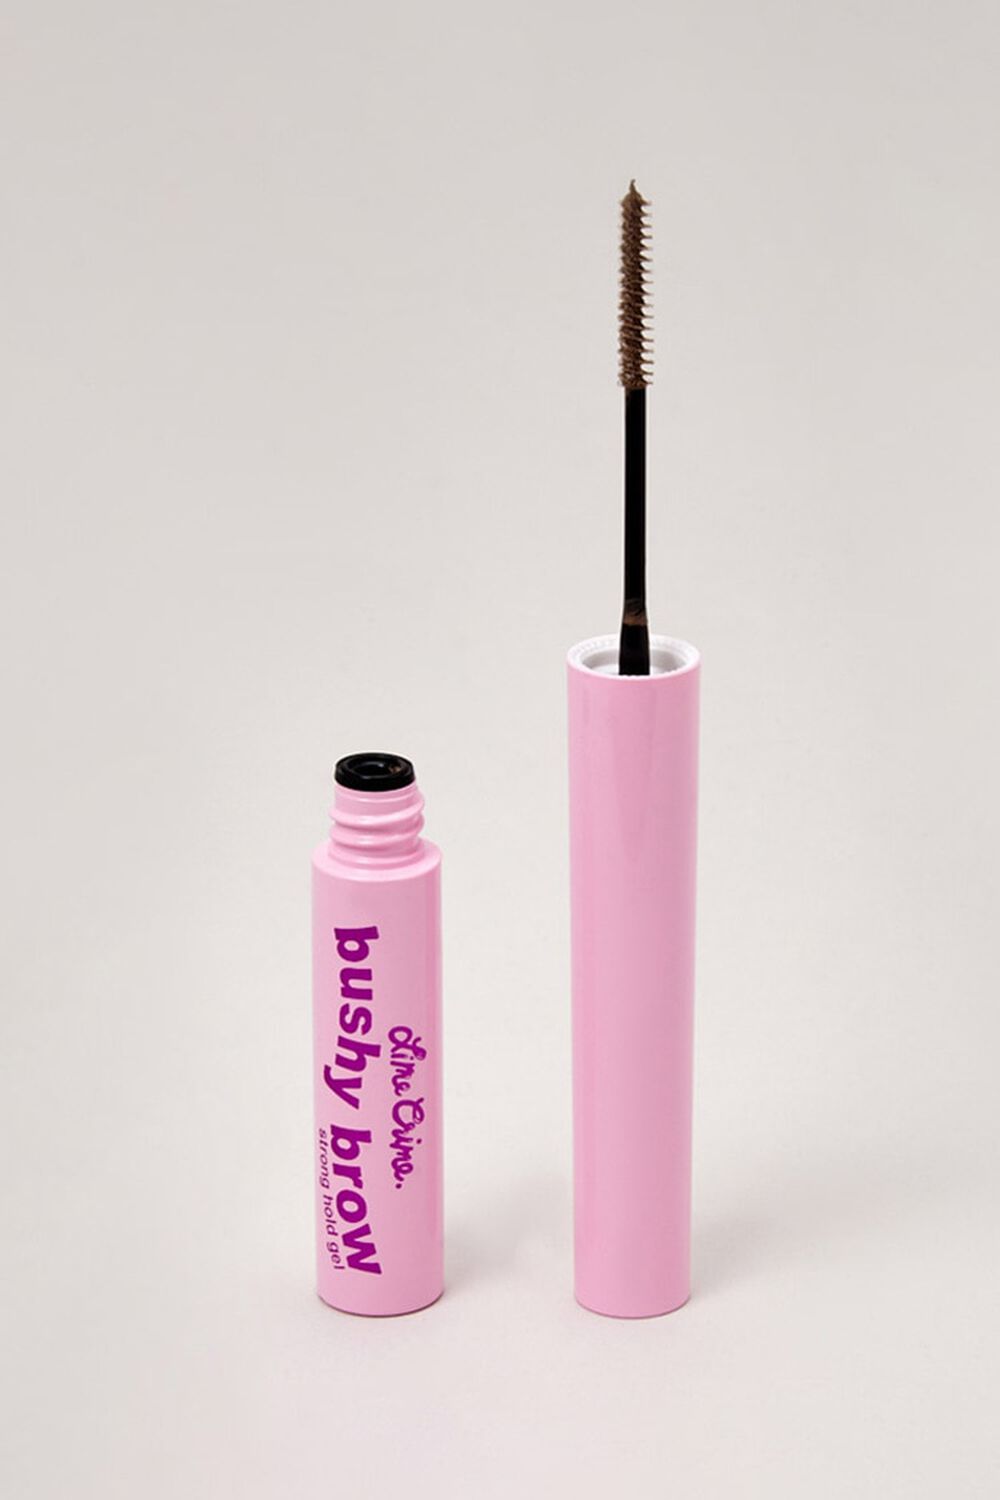 DIRTY BLONDE Bushy Brow Strong Hold Gel, image 1